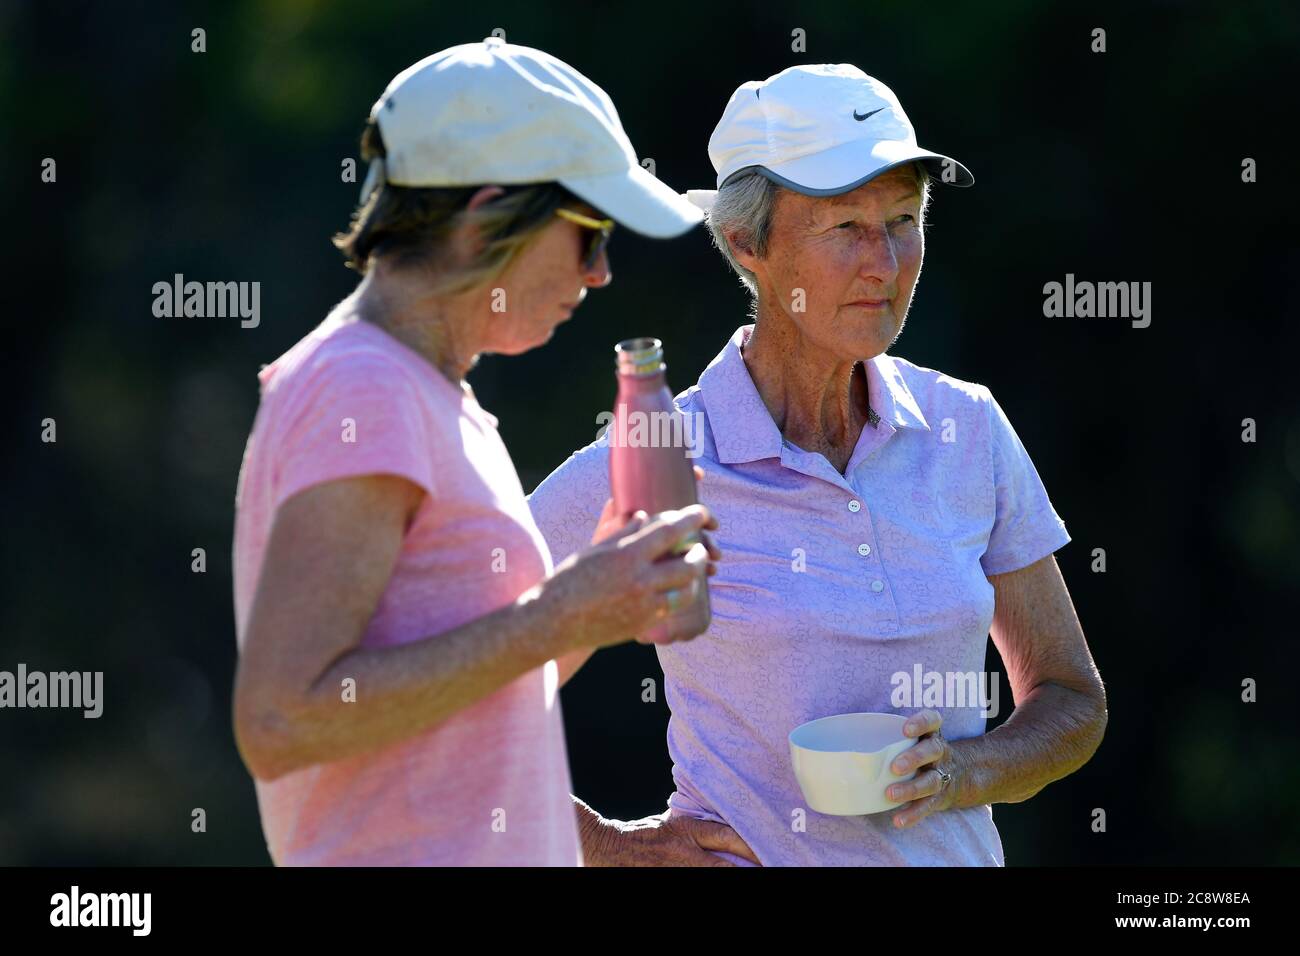 Older ladies take time out for refreshments during a local tennis tournament in Victoria Australia Stock Photo